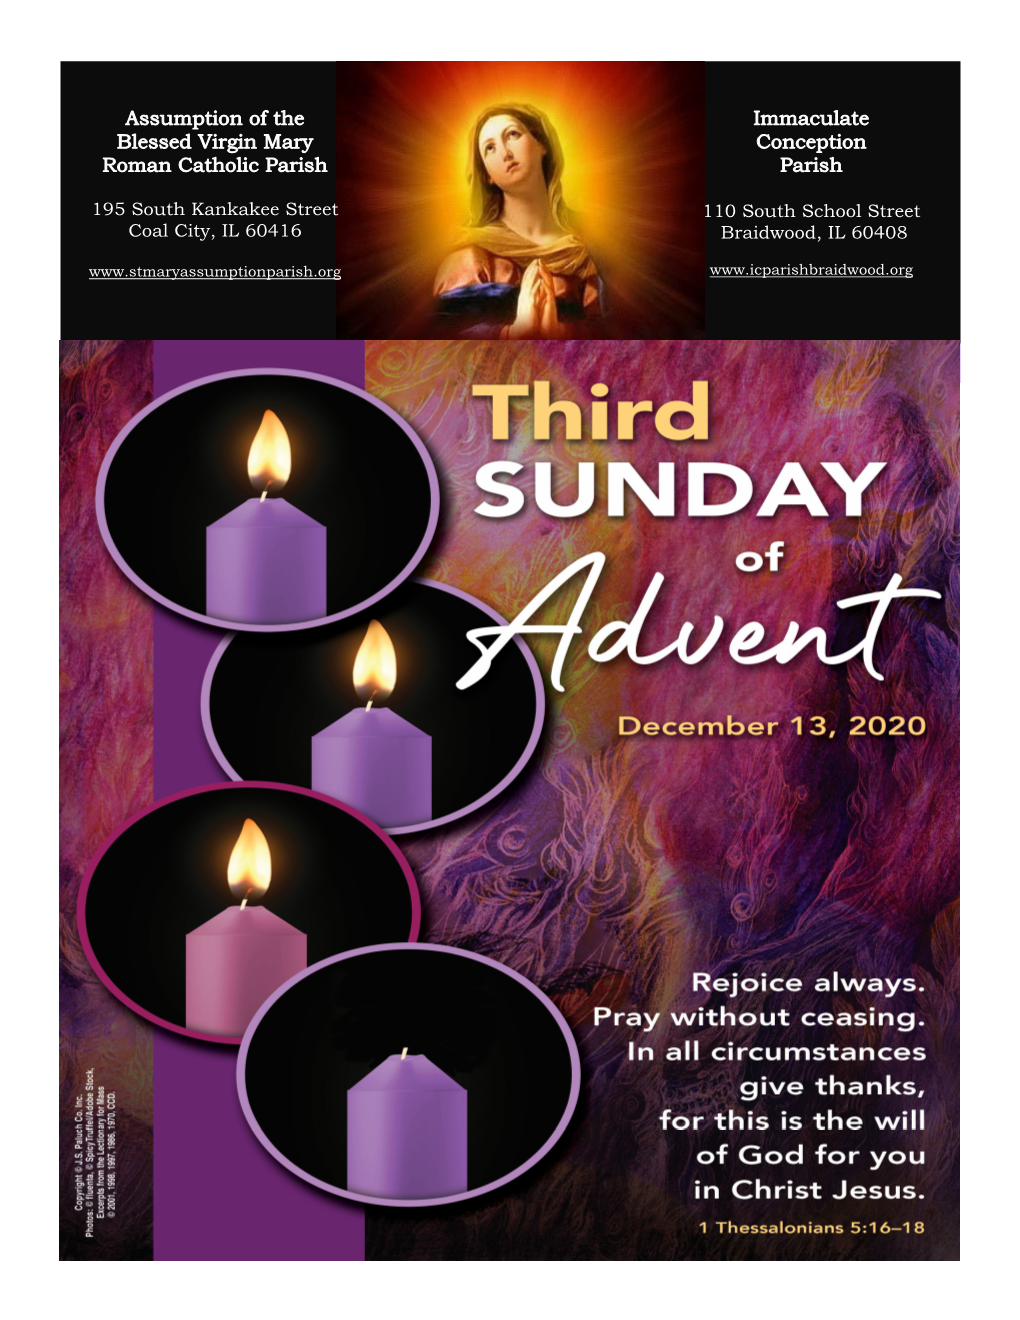 Jesus Prays in Thanks to God, Who Has Revealed Himself to the Lowly. Matthew 11:25-30 December 13, 2020 Third Sunday of Advent Page 2